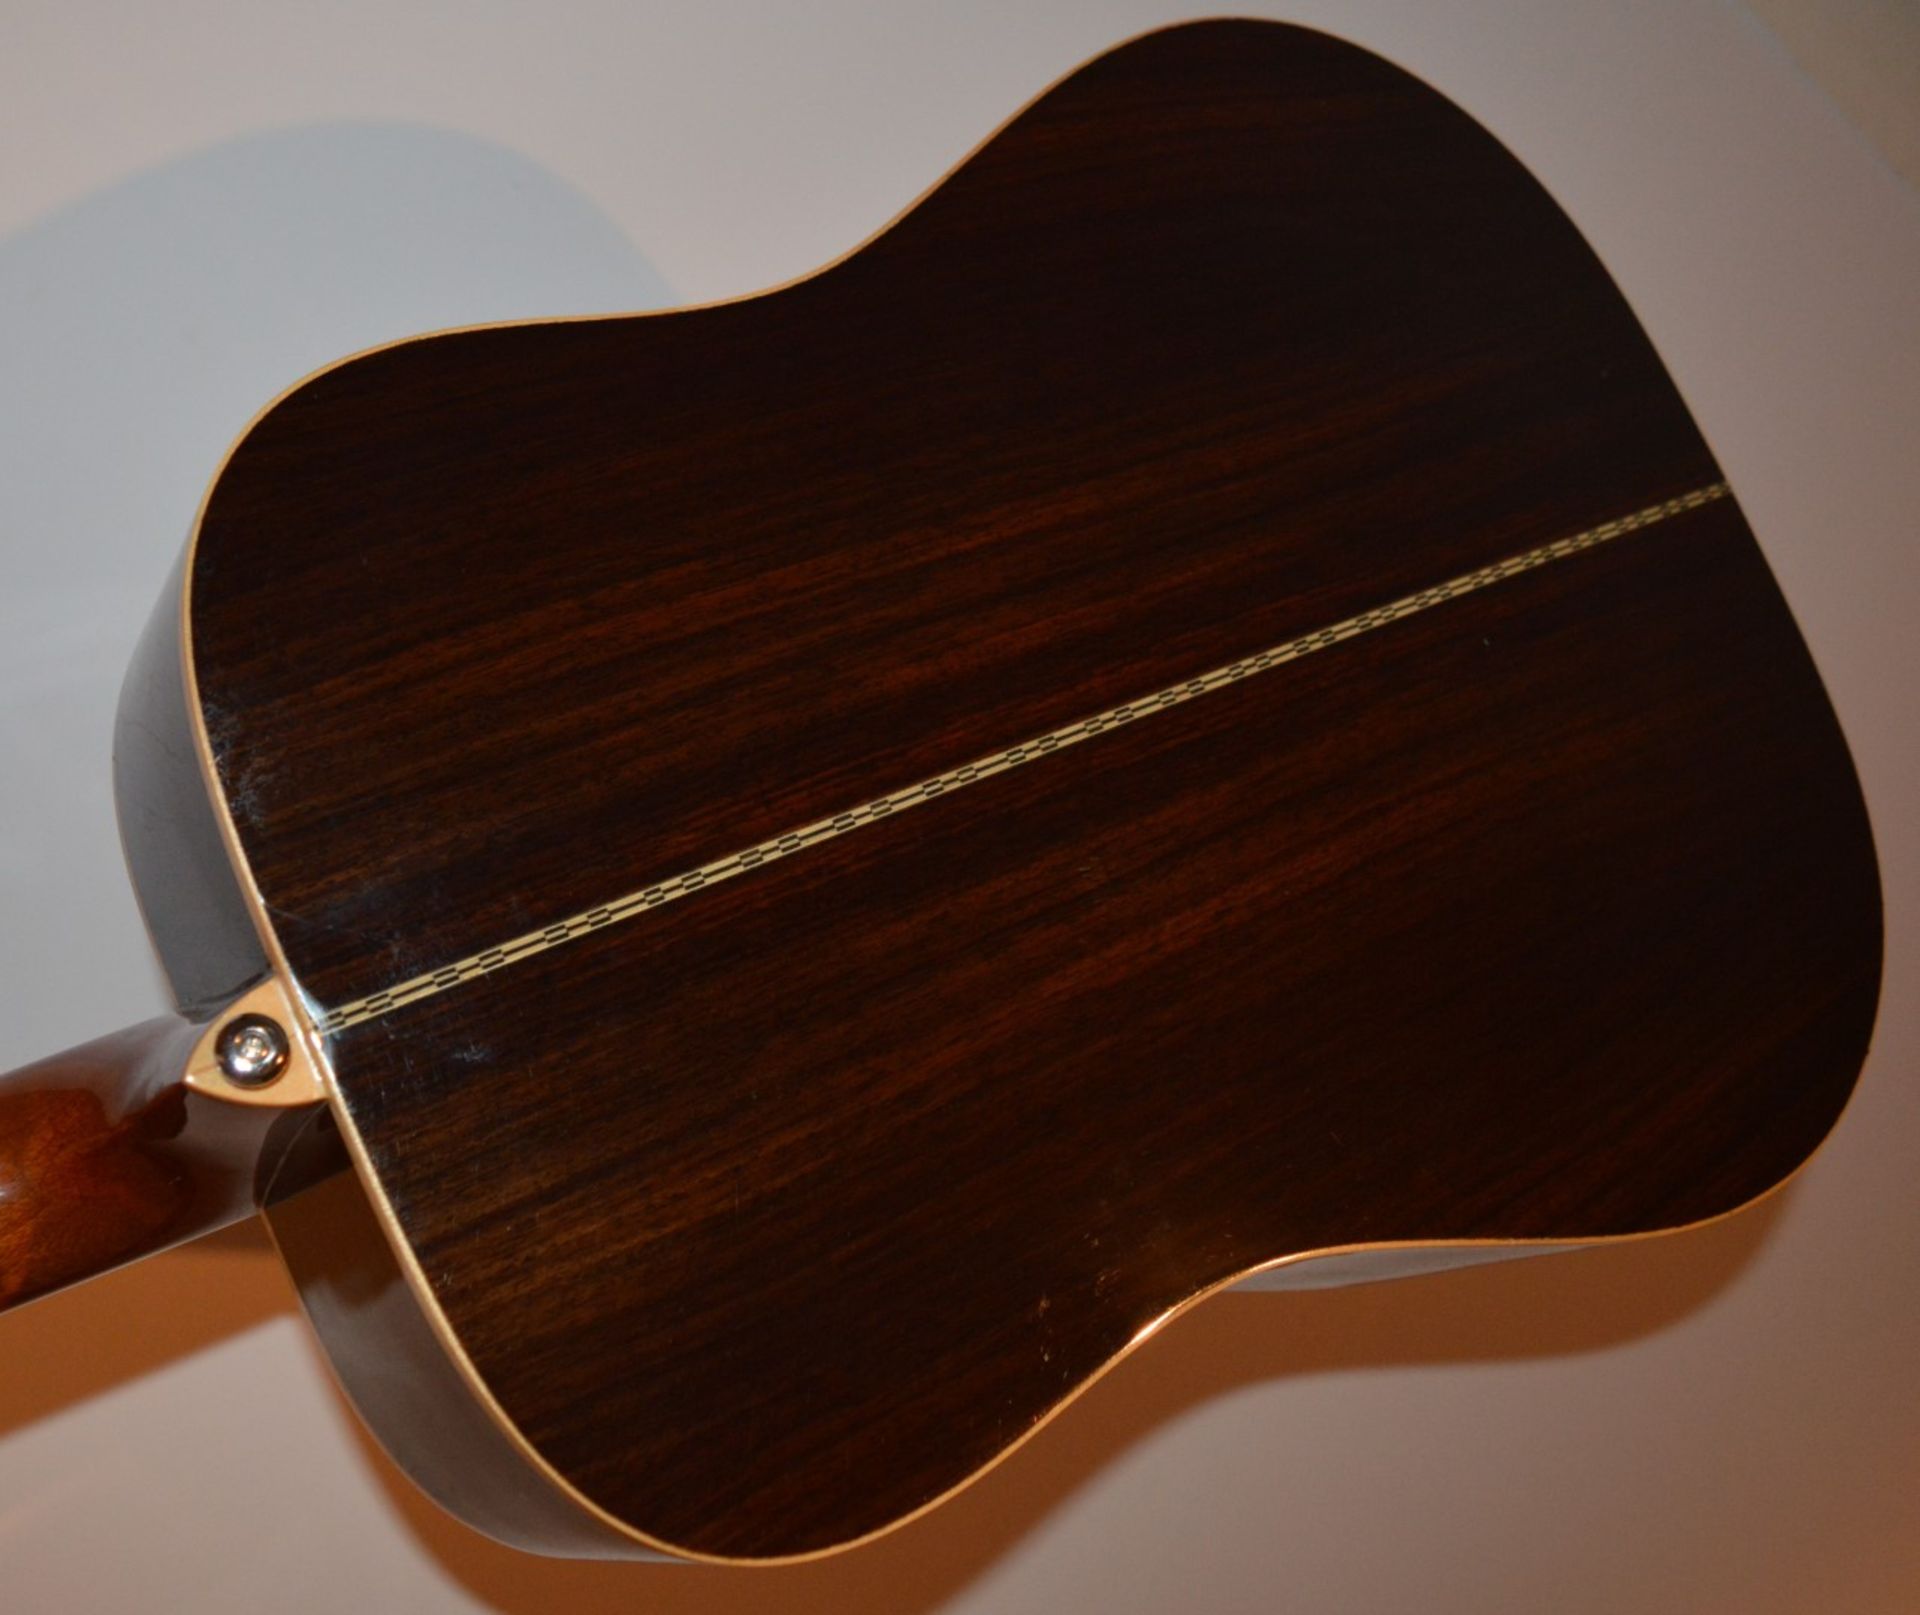 1 x Adam Black S6 Dreadnought Acoustic Guitar With Grover Machine Heads - CL010 - Ref J901 - - Image 6 of 10